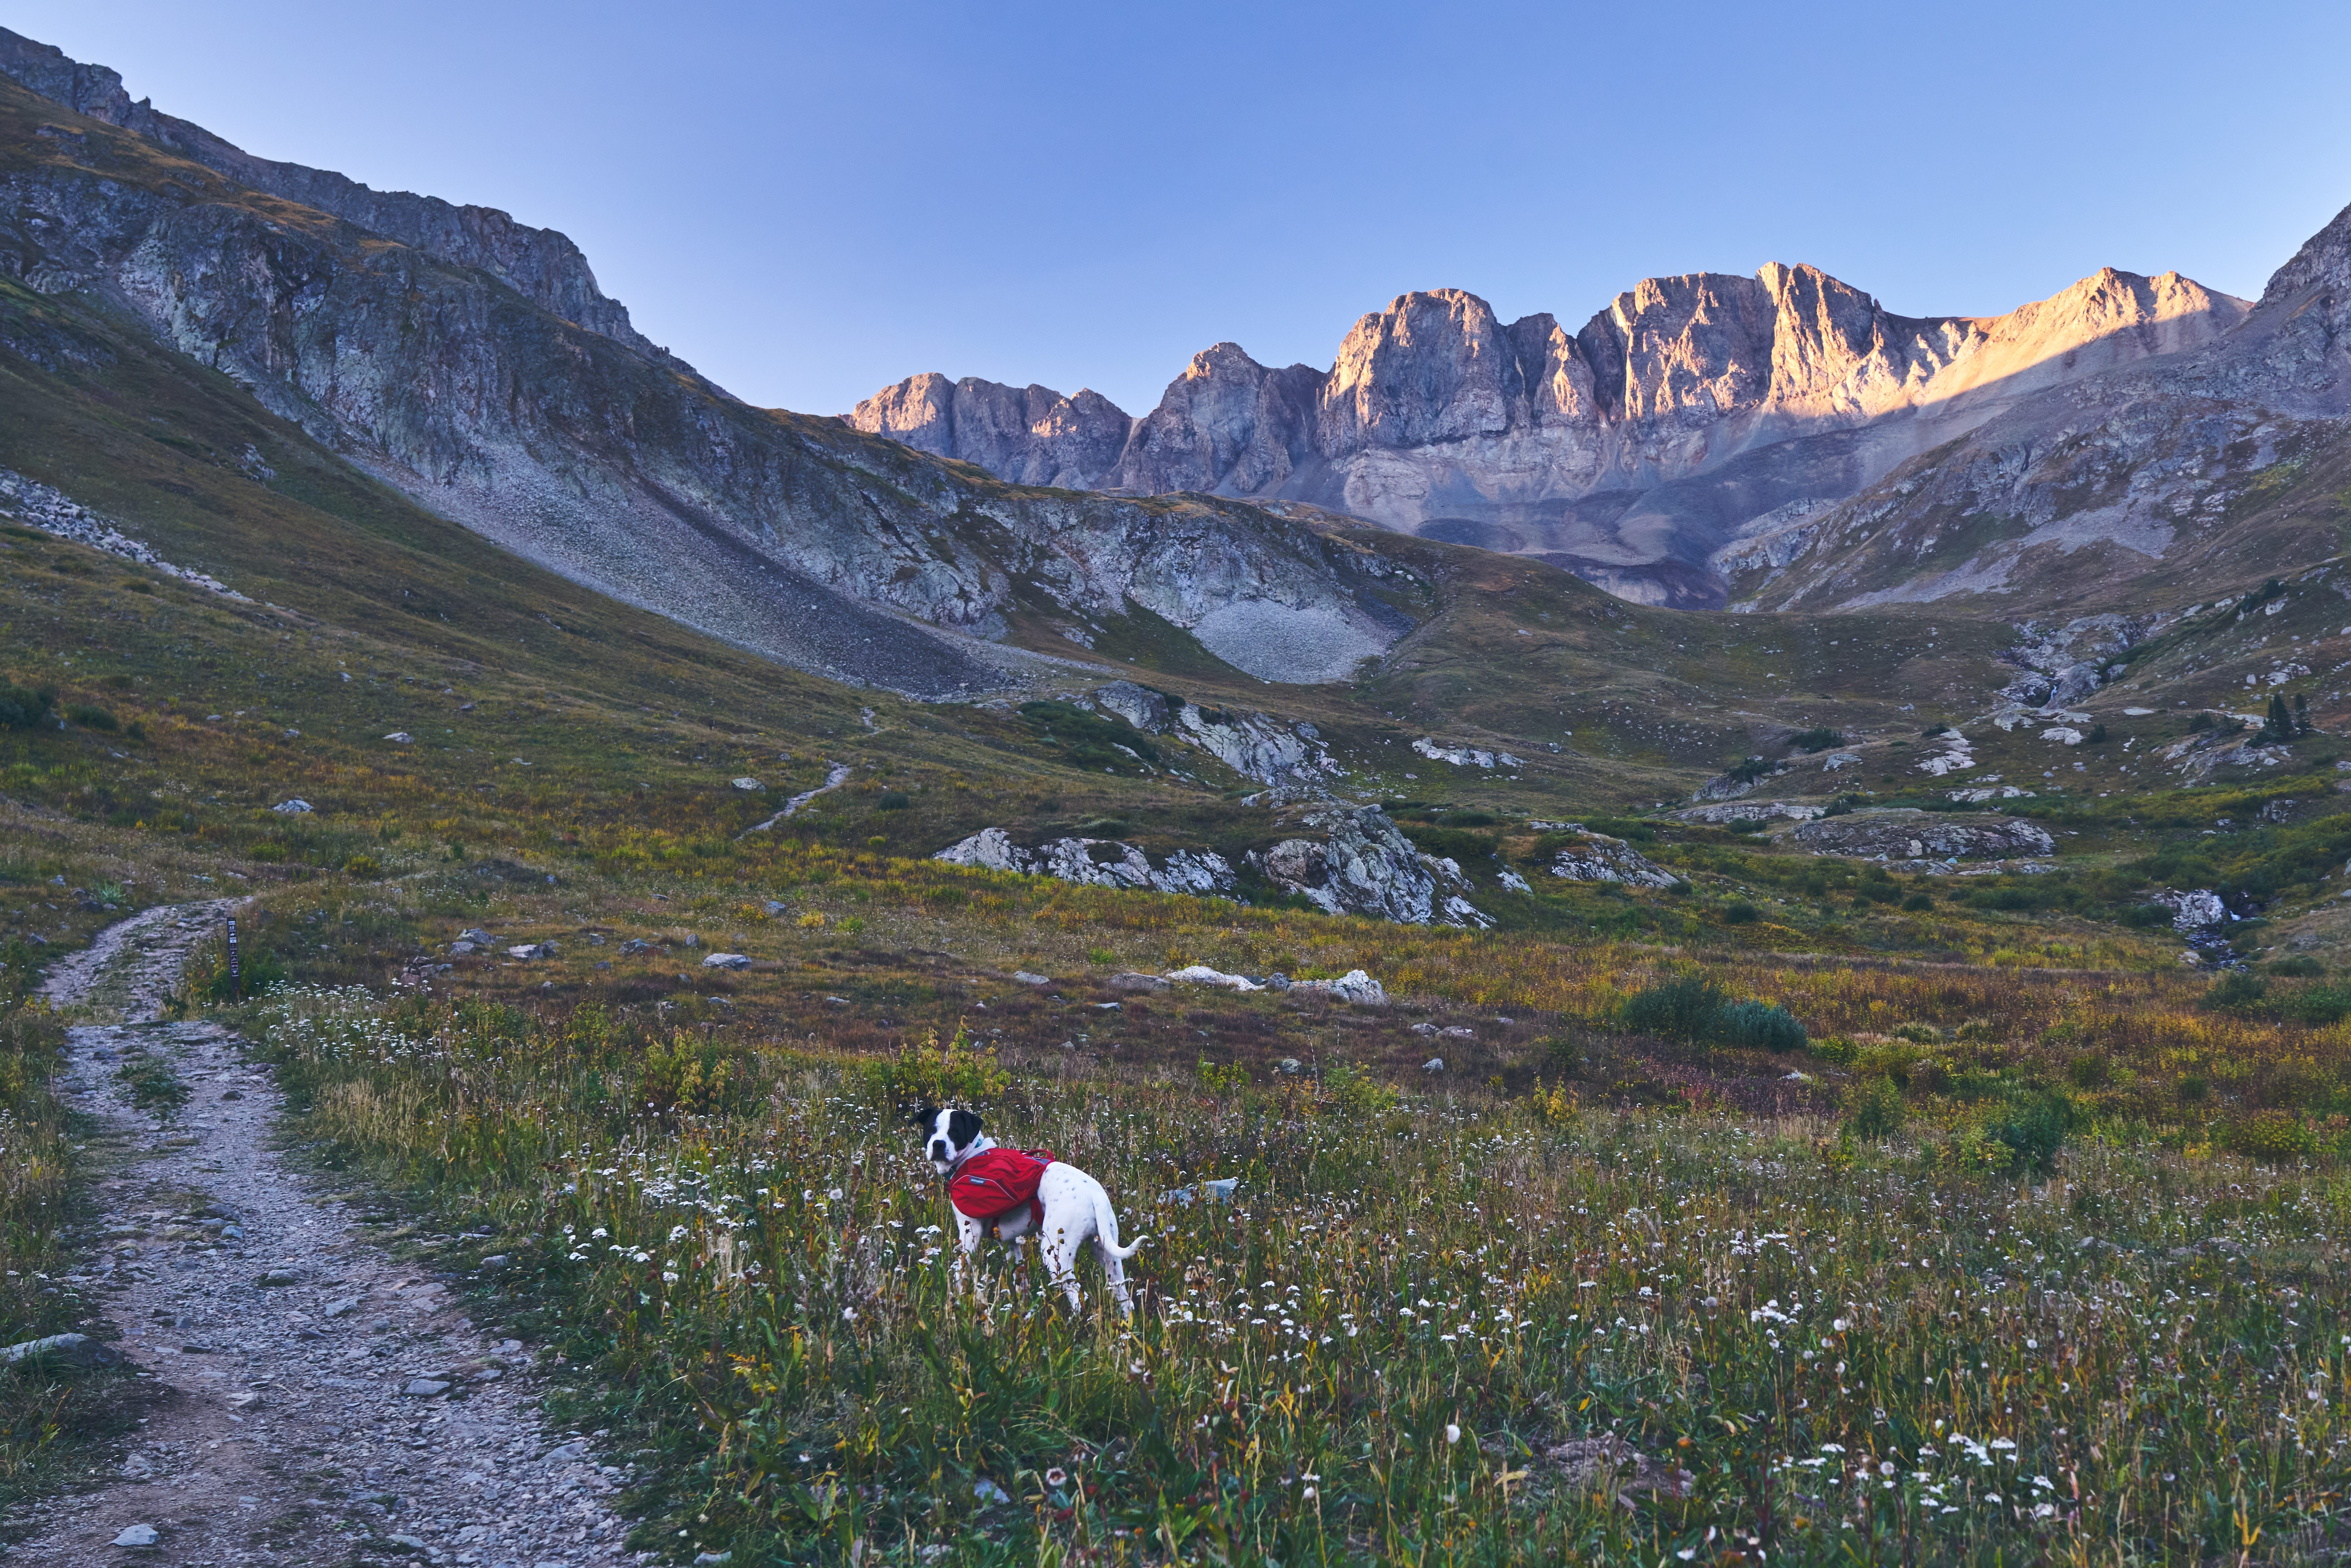 A dog looking back amongst wildflowers. Rocky mountains in the background.